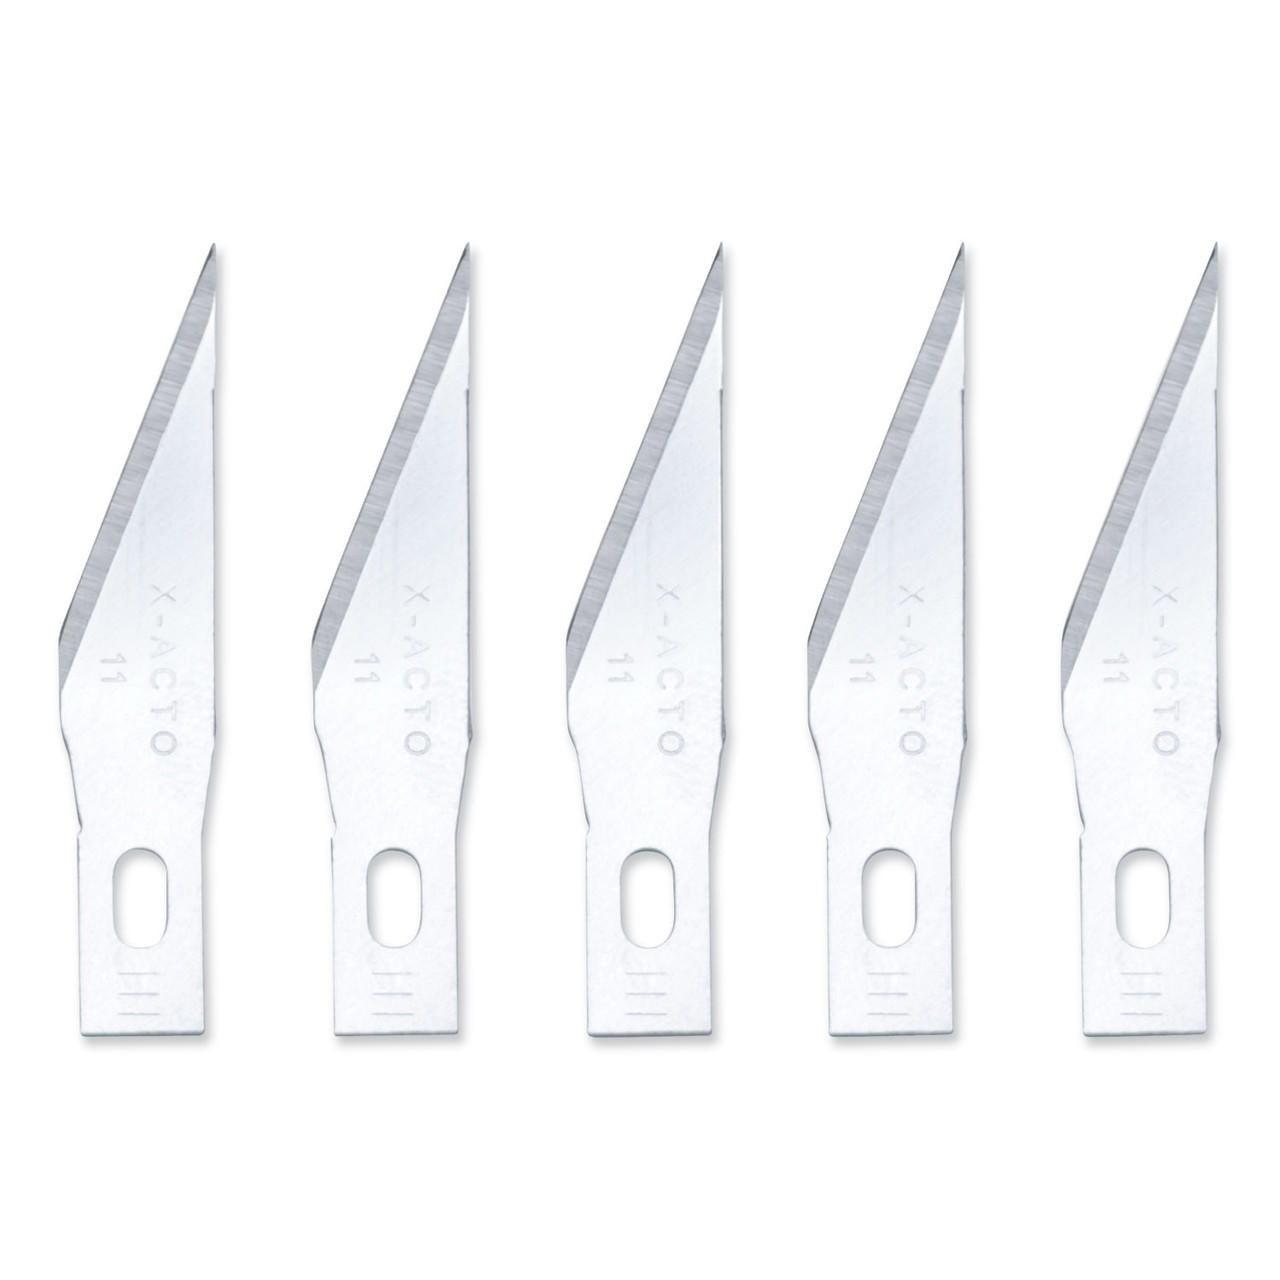 X-Acto Z-Series #11 Replacement Blades - 5 pack